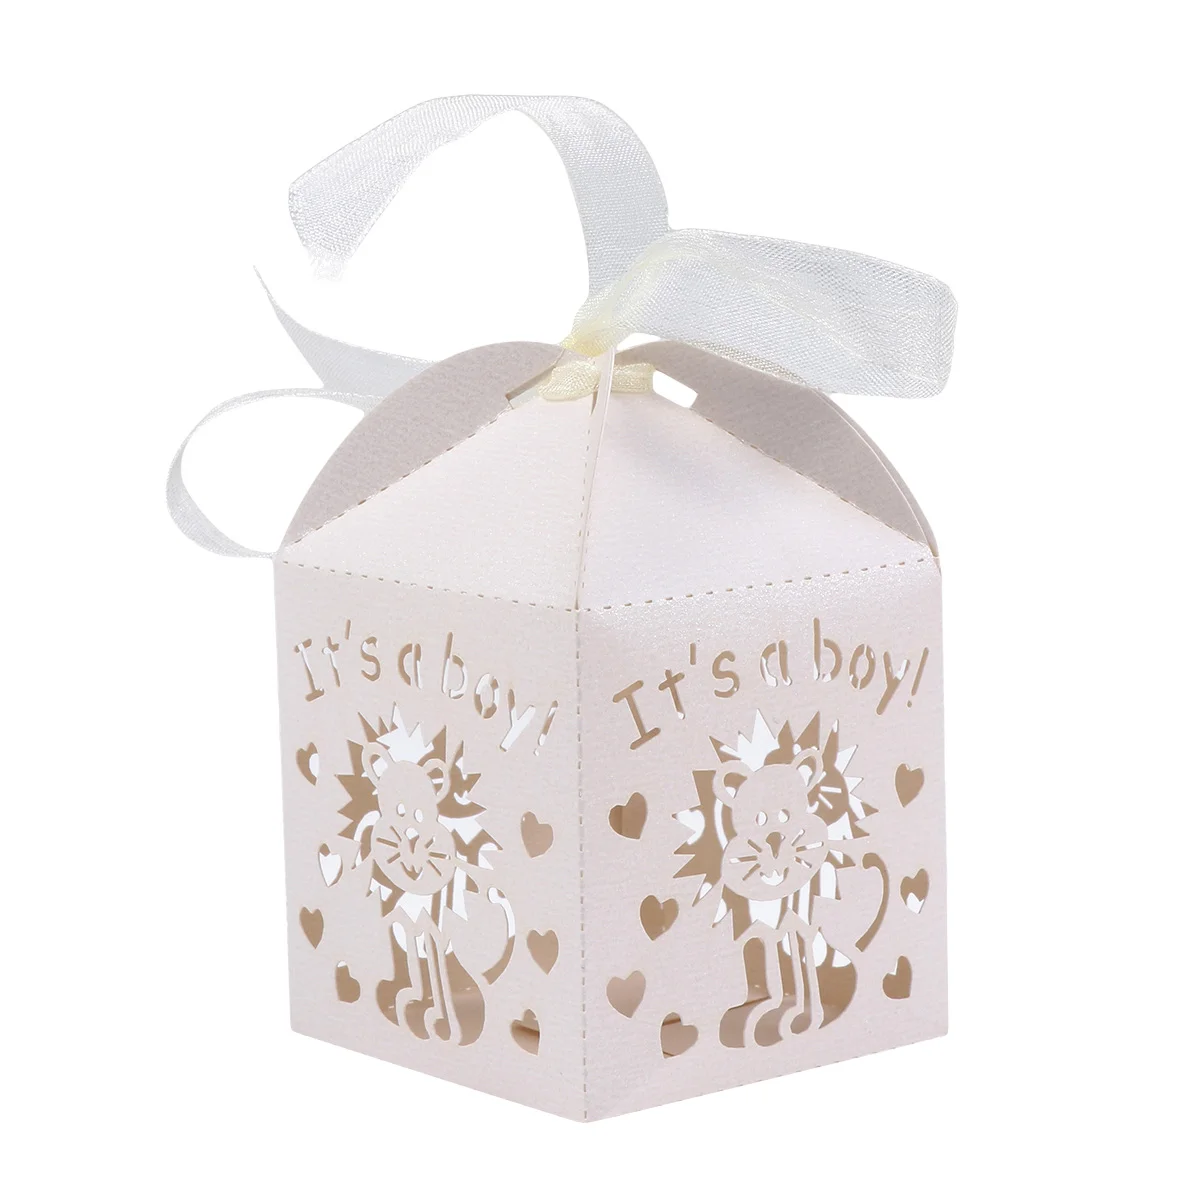 

Boxes Box Favor Wedding Gift Party Hollow Candy Paper Out Shower Baby Reveal Gender Craft Chocolate Packaging Carriage Treat